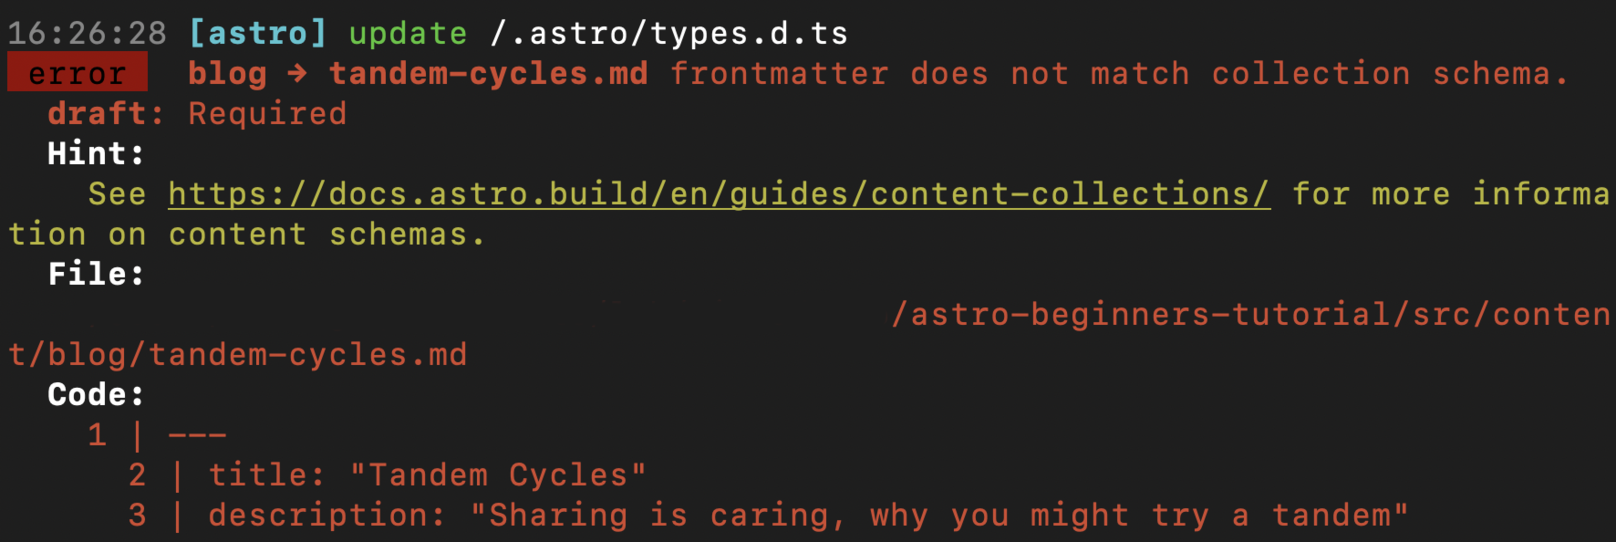 Astro content collections terminal validation error